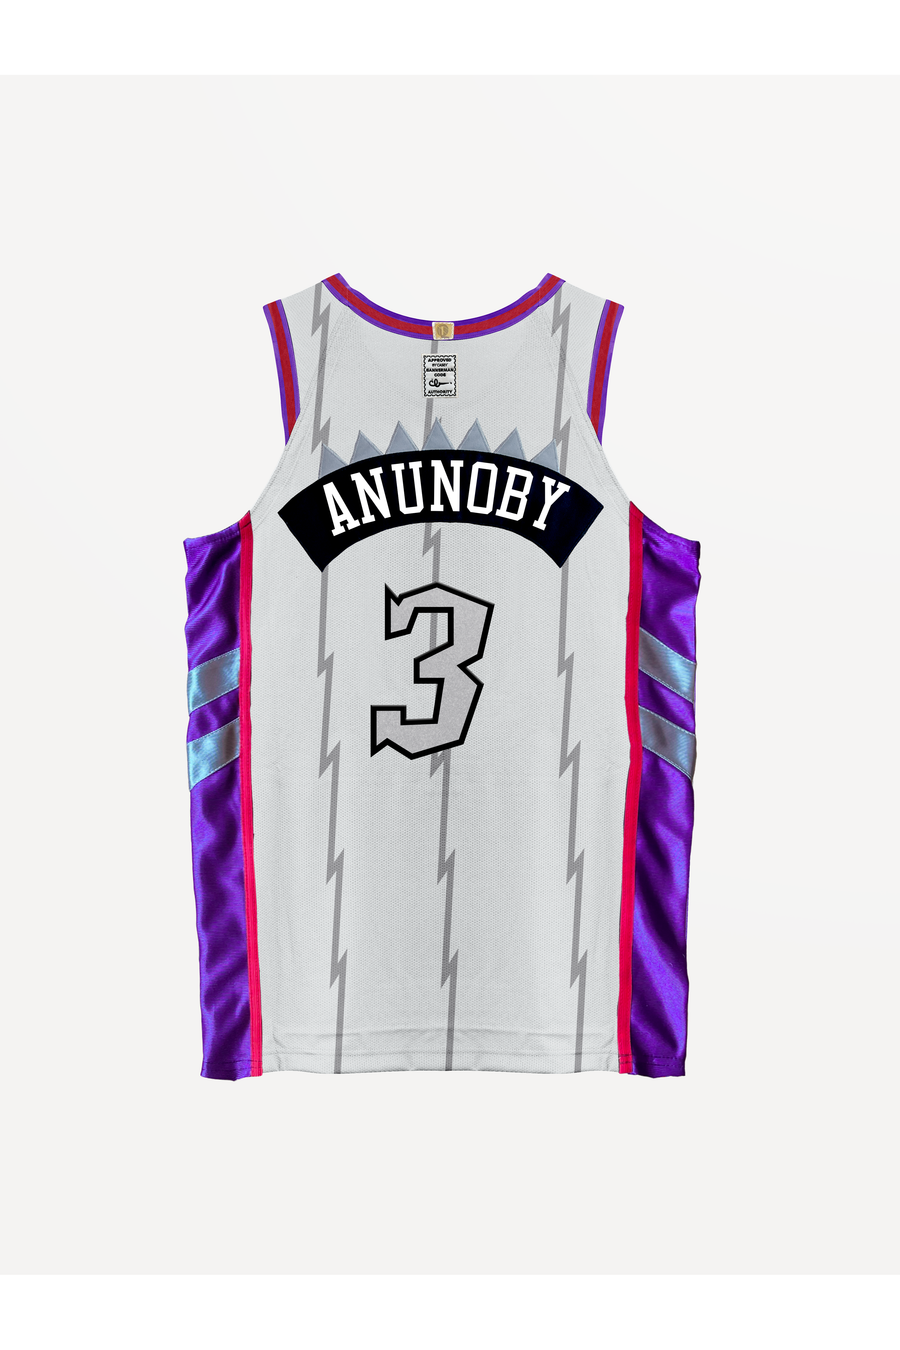 TORONTO TRIBUTE HOME VARIANT JERSEY